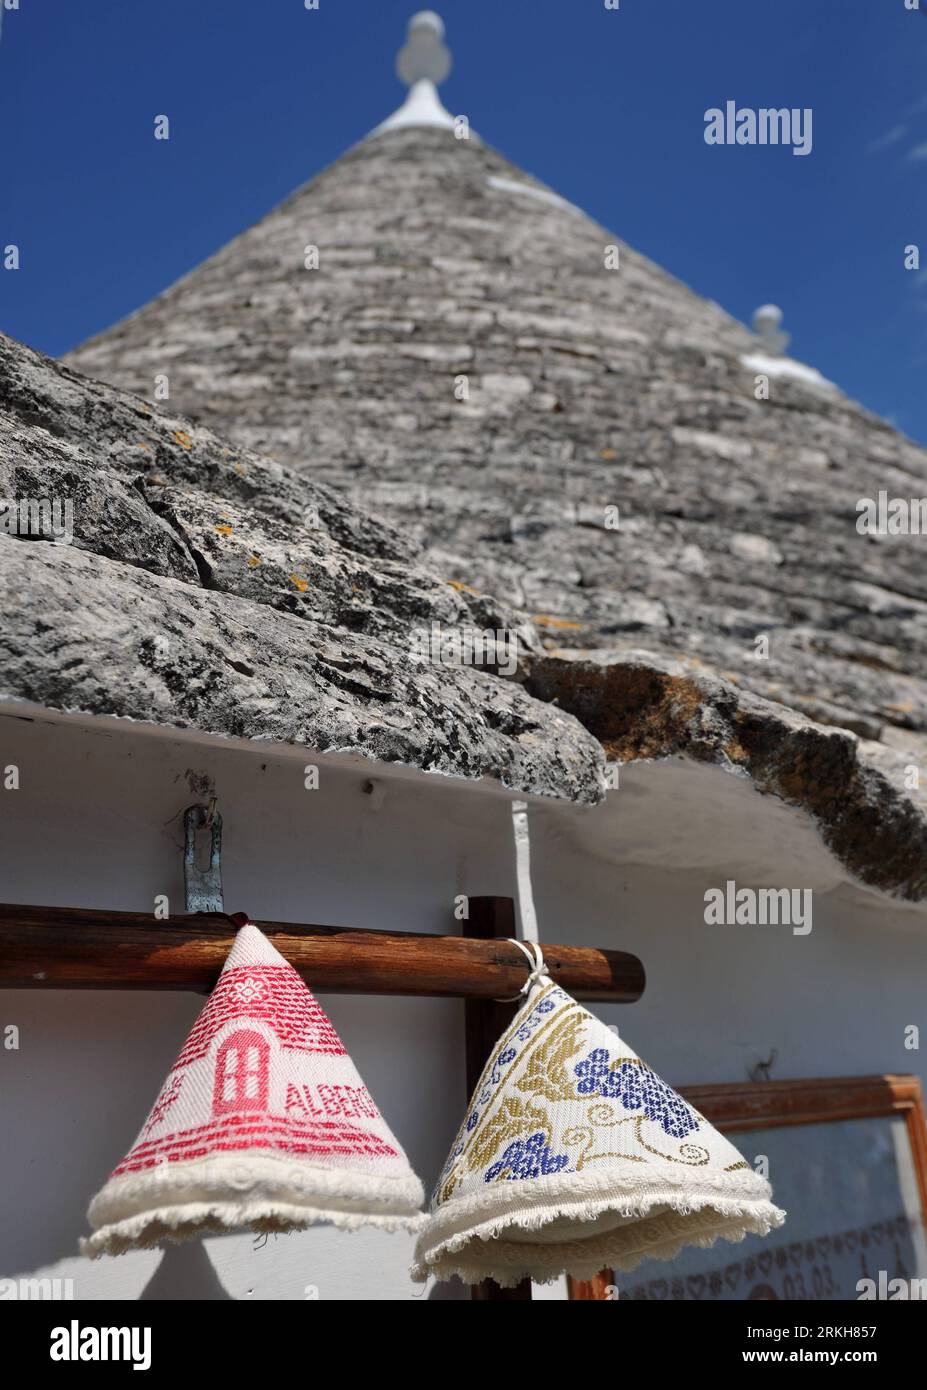 Bildnummer: 55711008  Datum: 10.08.2011  Copyright: imago/Xinhua (110812) -- ALBEROBELLO, Aug. 12, 2011 (Xinhua) -- Photo taken on Aug. 10, 2011 shows souvenir hats under the roof of a Trulli in Alberobello, southern Italy. Alberobello, the city of drystone dwellings known as trulli, is an exceptional example of vernacular architecture. The trulli are made of roughly worked limestone boulders collected from neighbouring fields. Characteristically, they feature pyramidal, domed or conical roofs built up of corbelled limestone slabs. UNESCO inscribed the Trulli of Alberobello in the World Herita Stock Photo